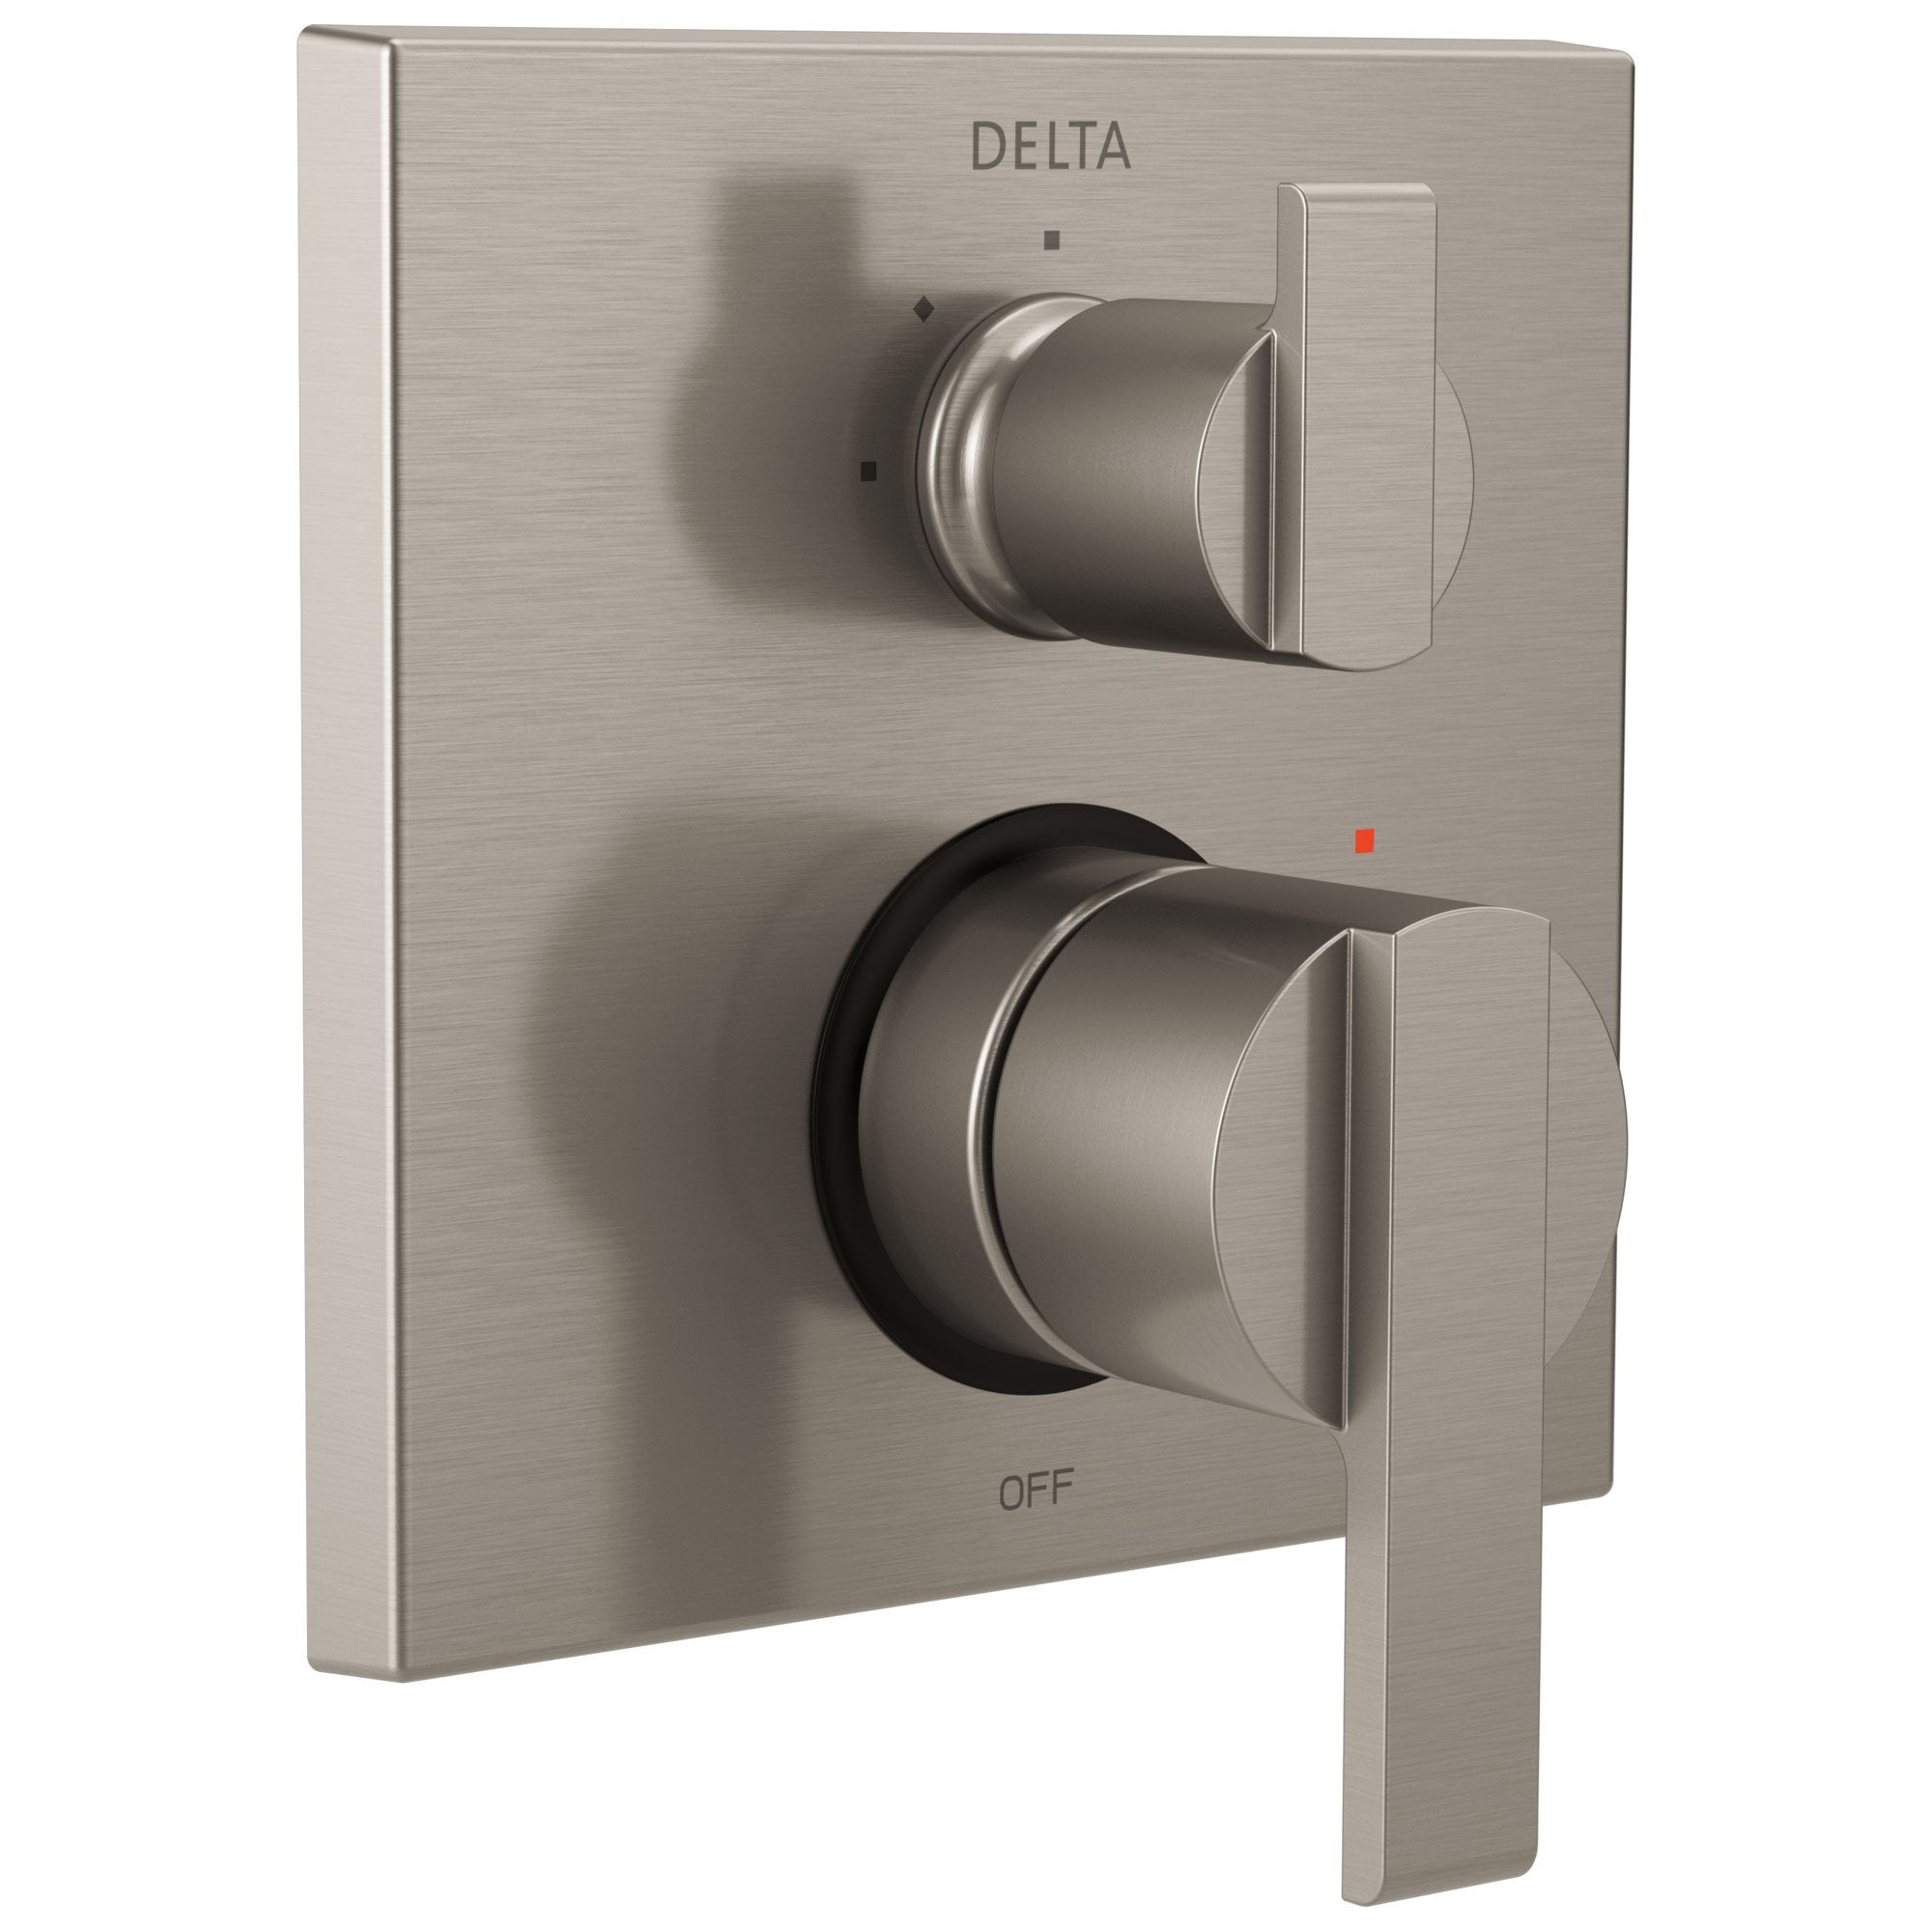 Delta Ara Stainless Steel Finish Shower Faucet Valve Trim Control Handle with 3-Setting Integrated Diverter Includes Trim Kit and Valve without Stops D2208V